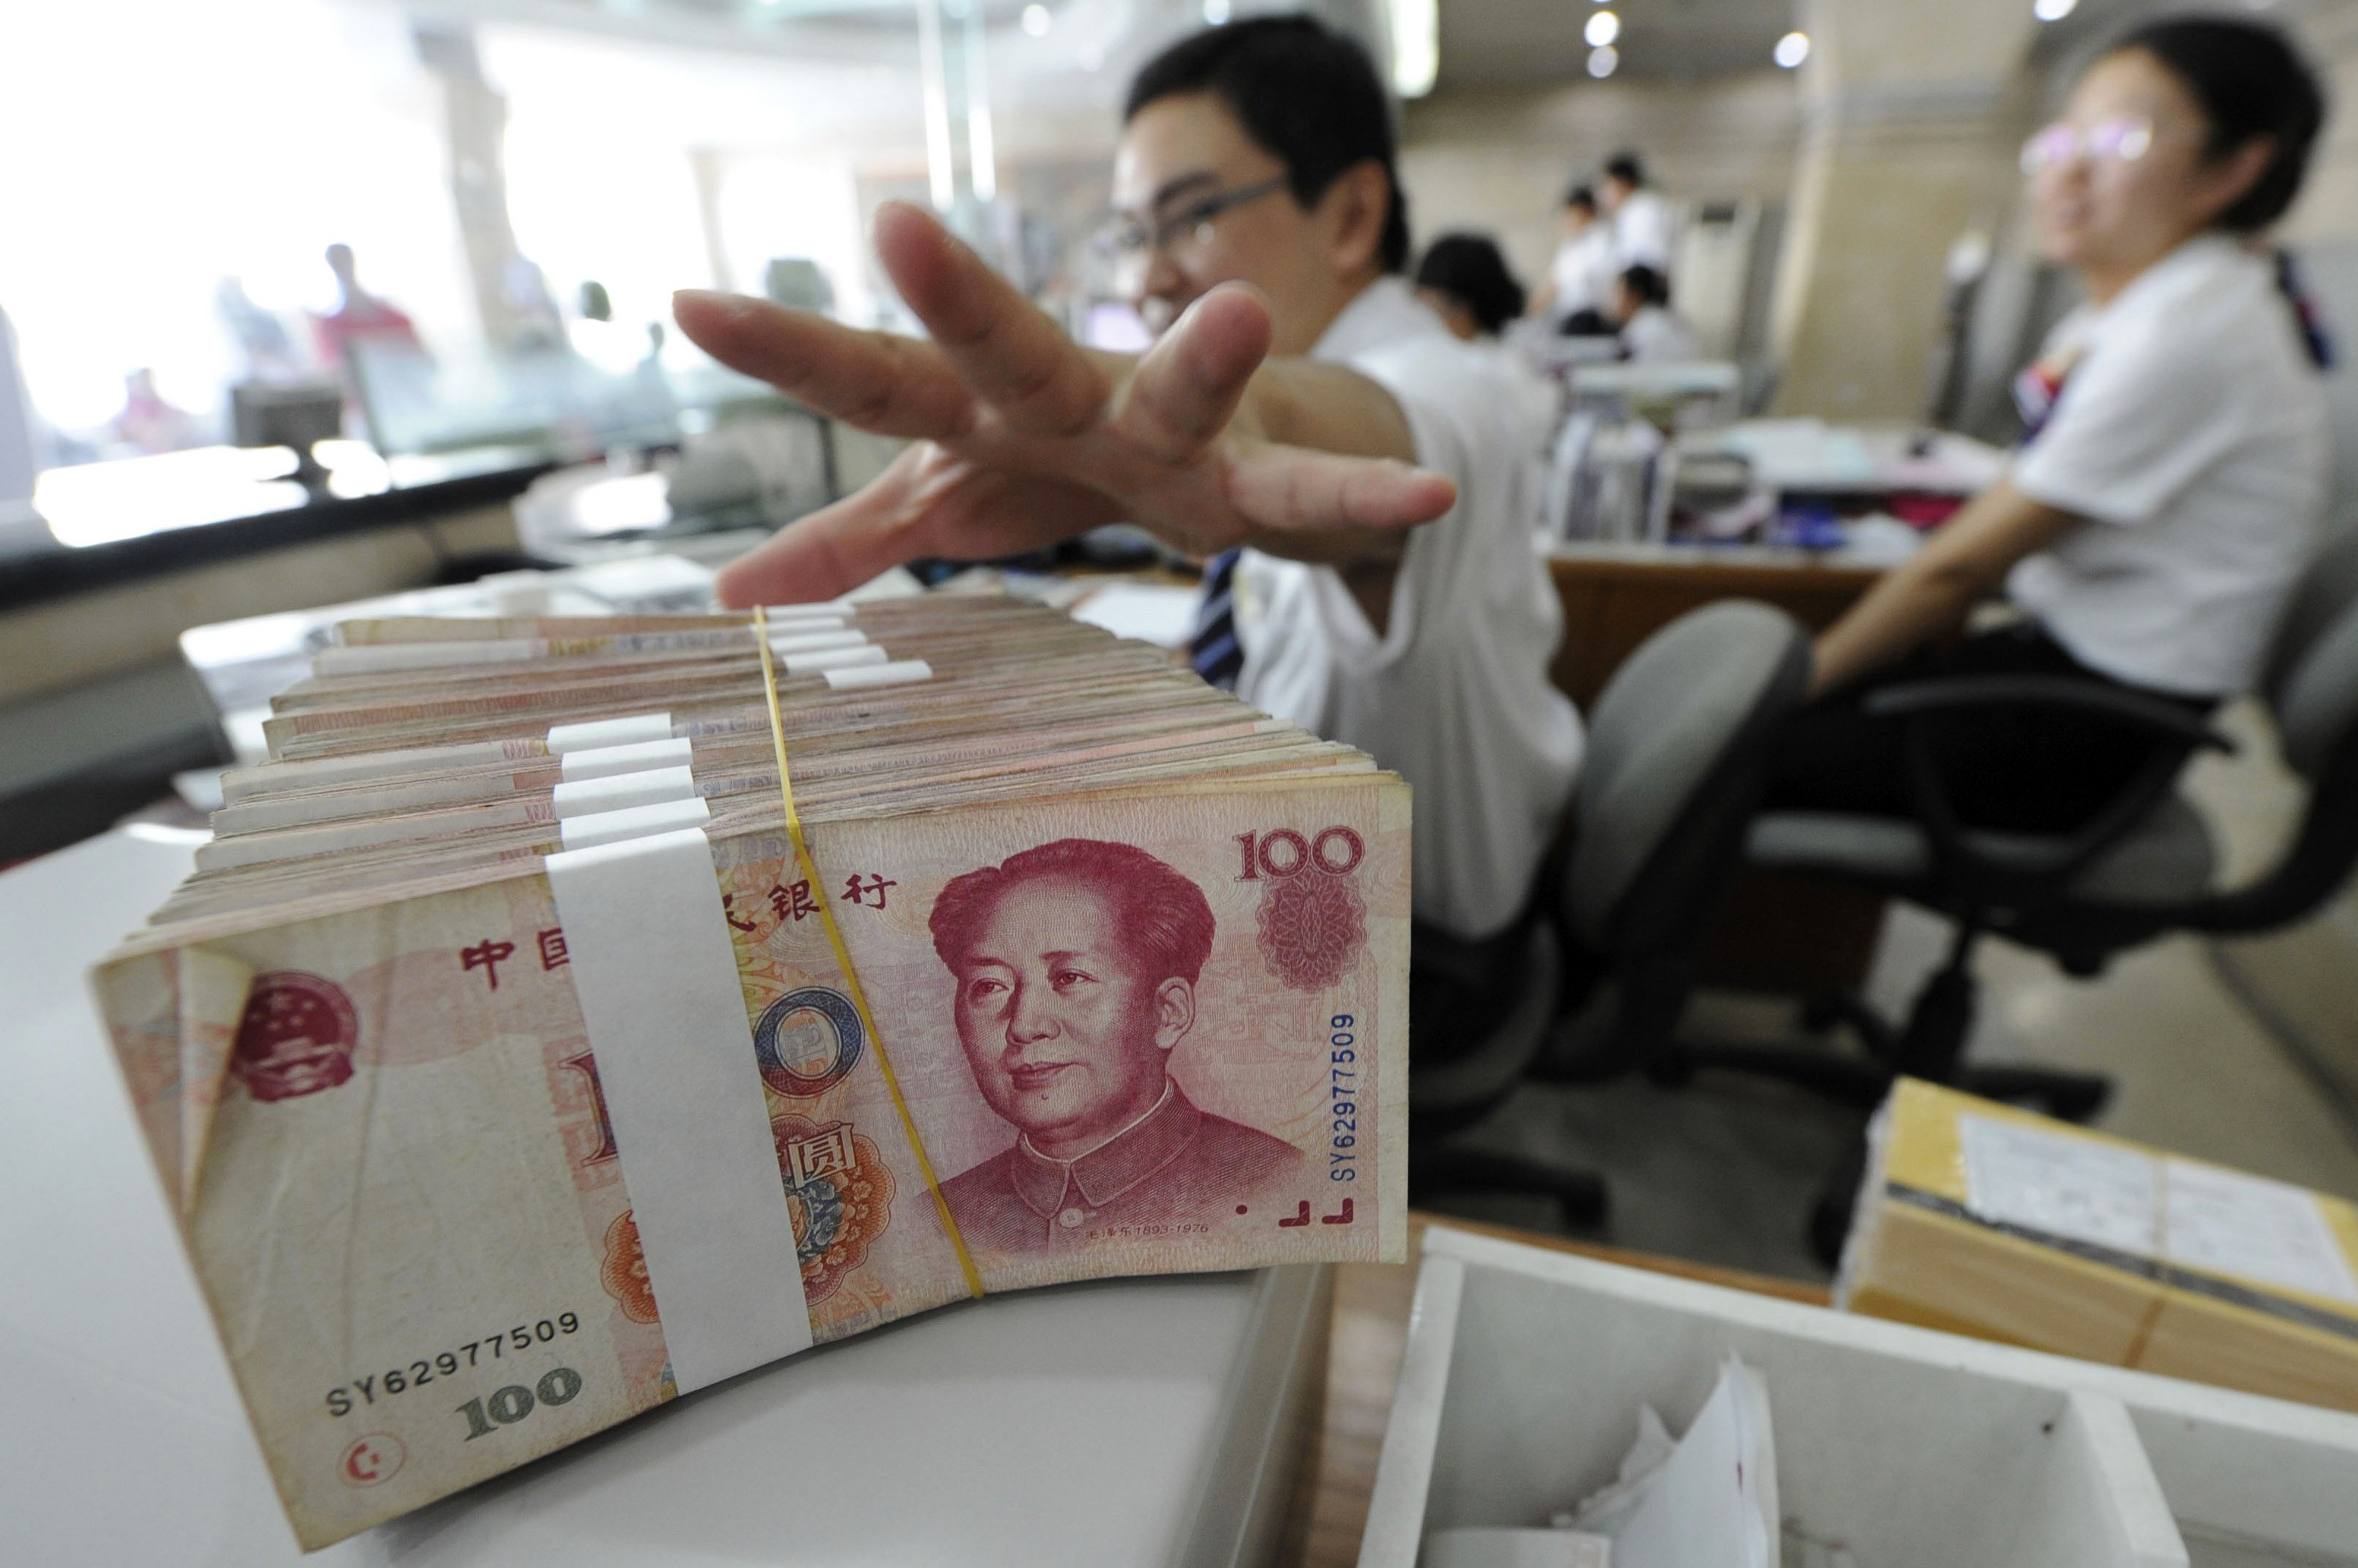 New rules issued by the central bank and the China Securities Regulatory Commission means that investors can only withdraw 10,000 yuan from a single money market fund in one day. Photo: Reuters